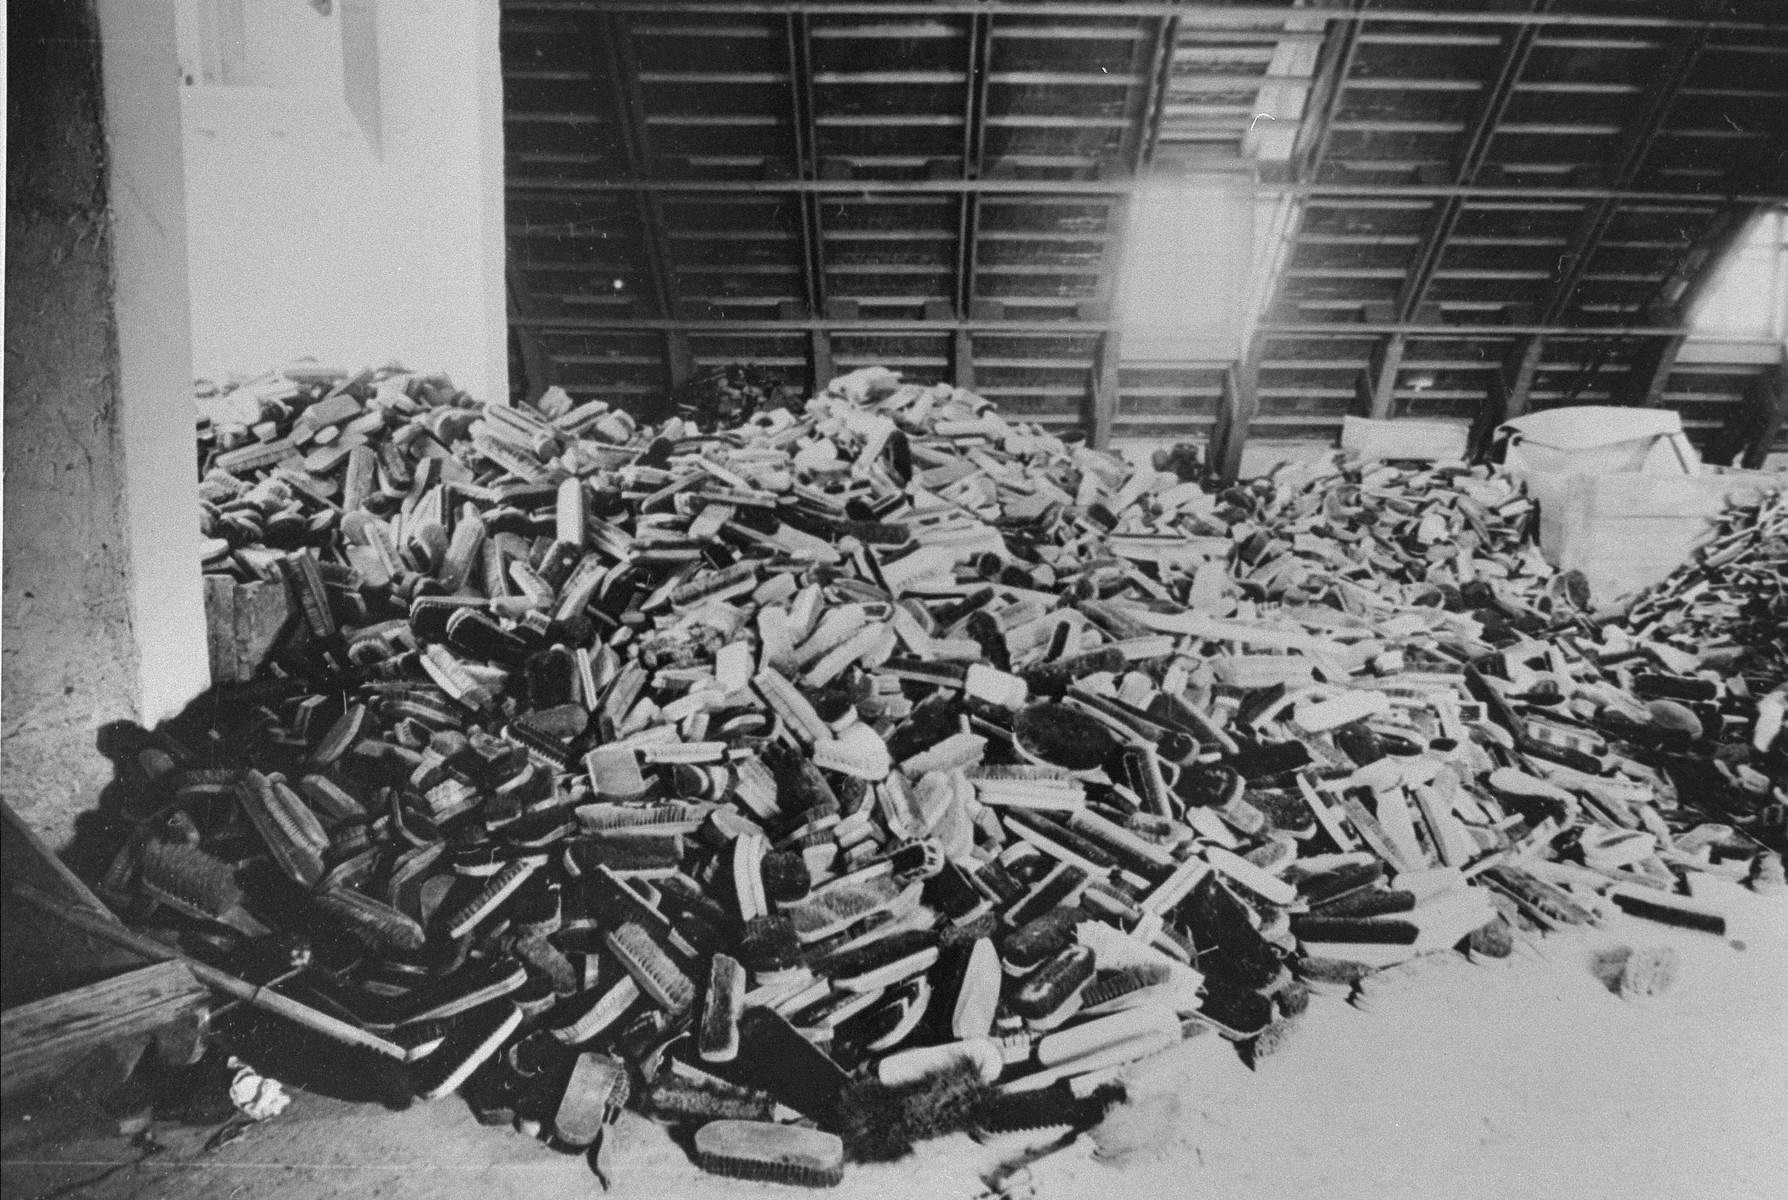 A large pile of brushes, that were confiscated from arriving prisoners, are stored in one of the "Canada" warehouses in Auschwitz.